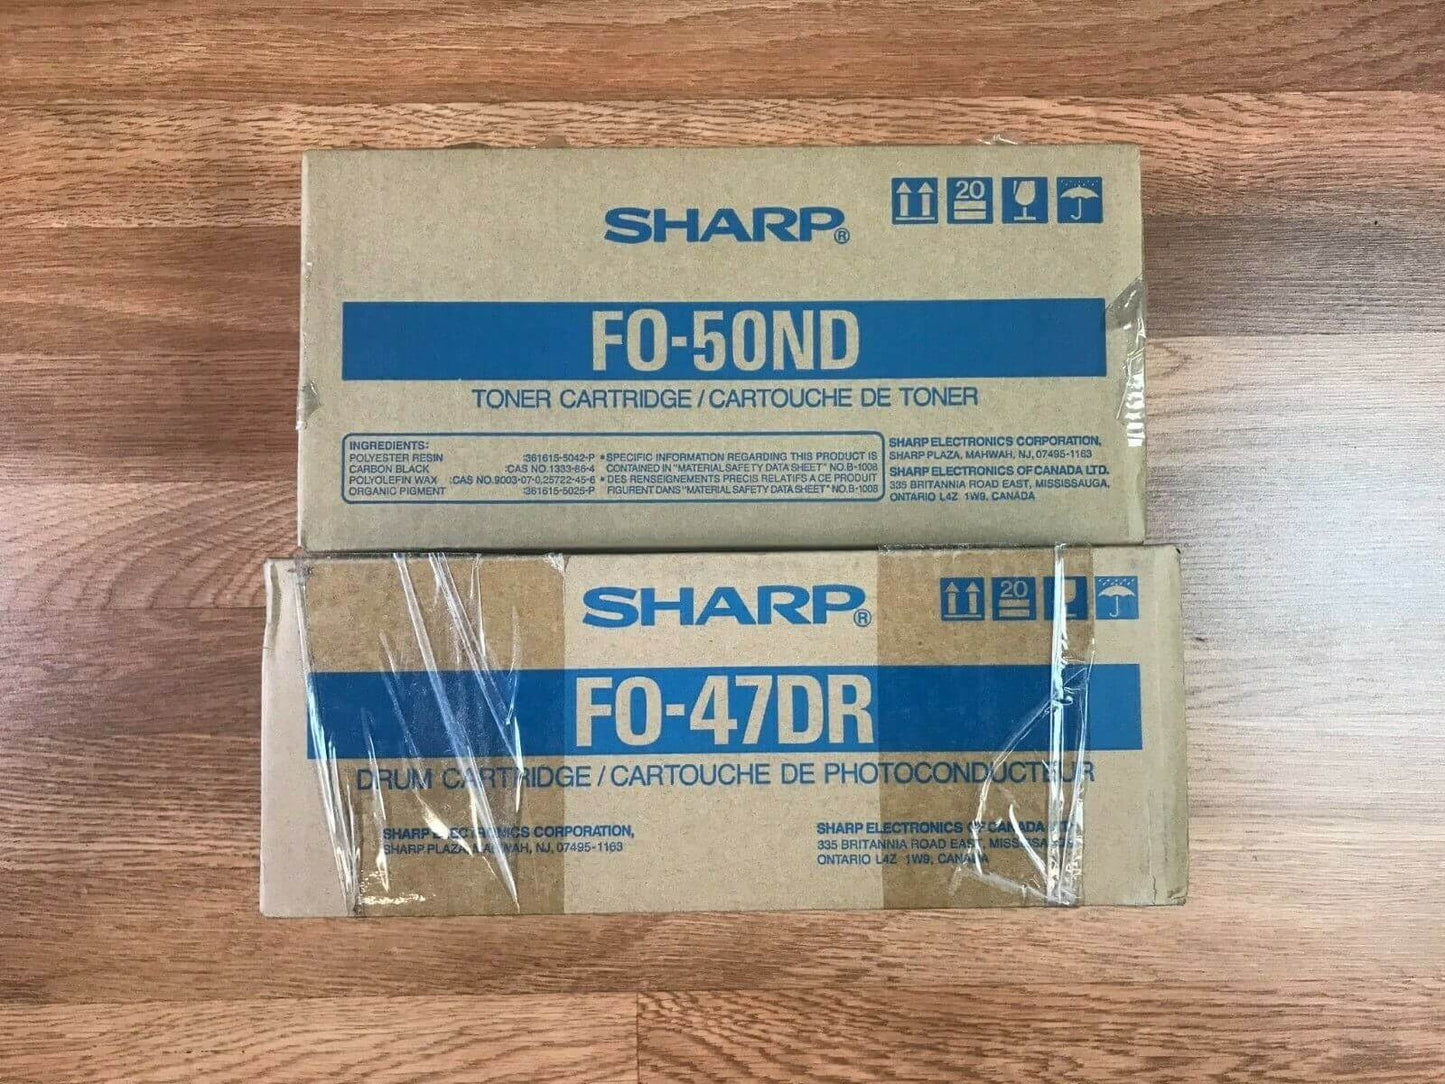 Sharp FO-50ND Toner & FO-47DR Drum For FO-4400, 4470, DC500 Same Day Shipping - copier-clearance-center